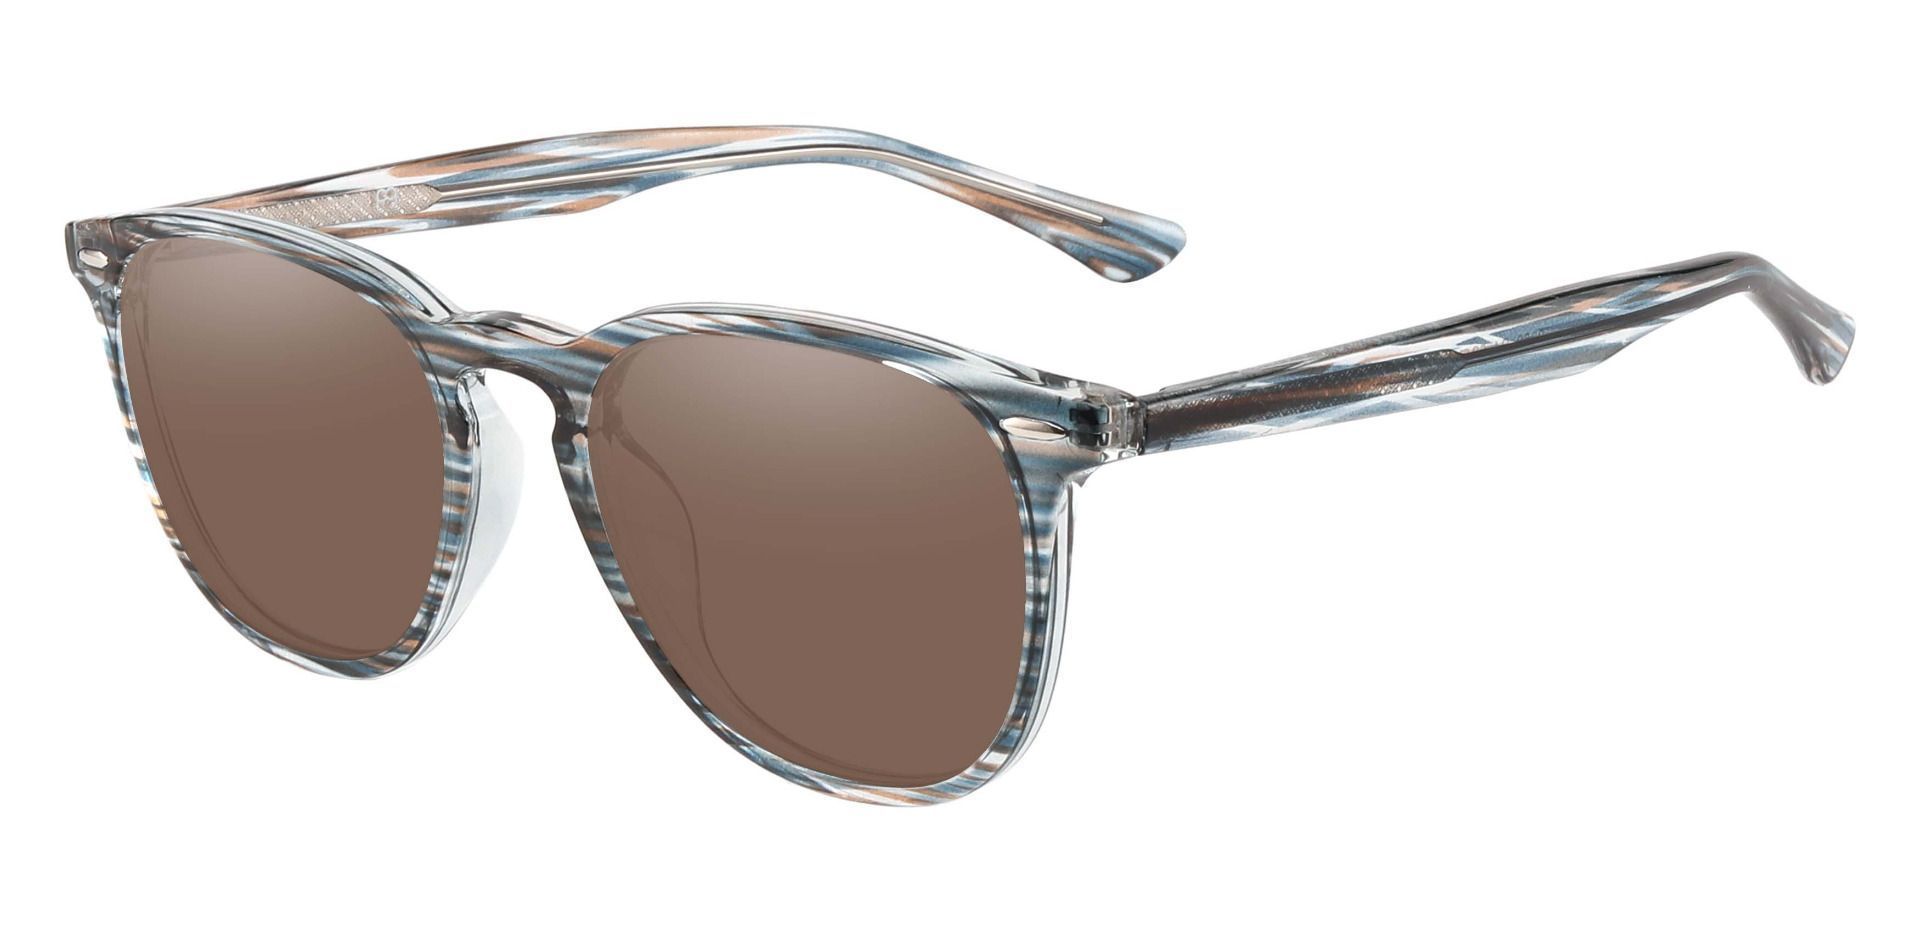 Sycamore Oval Prescription Sunglasses - Blue Frame With Brown Lenses